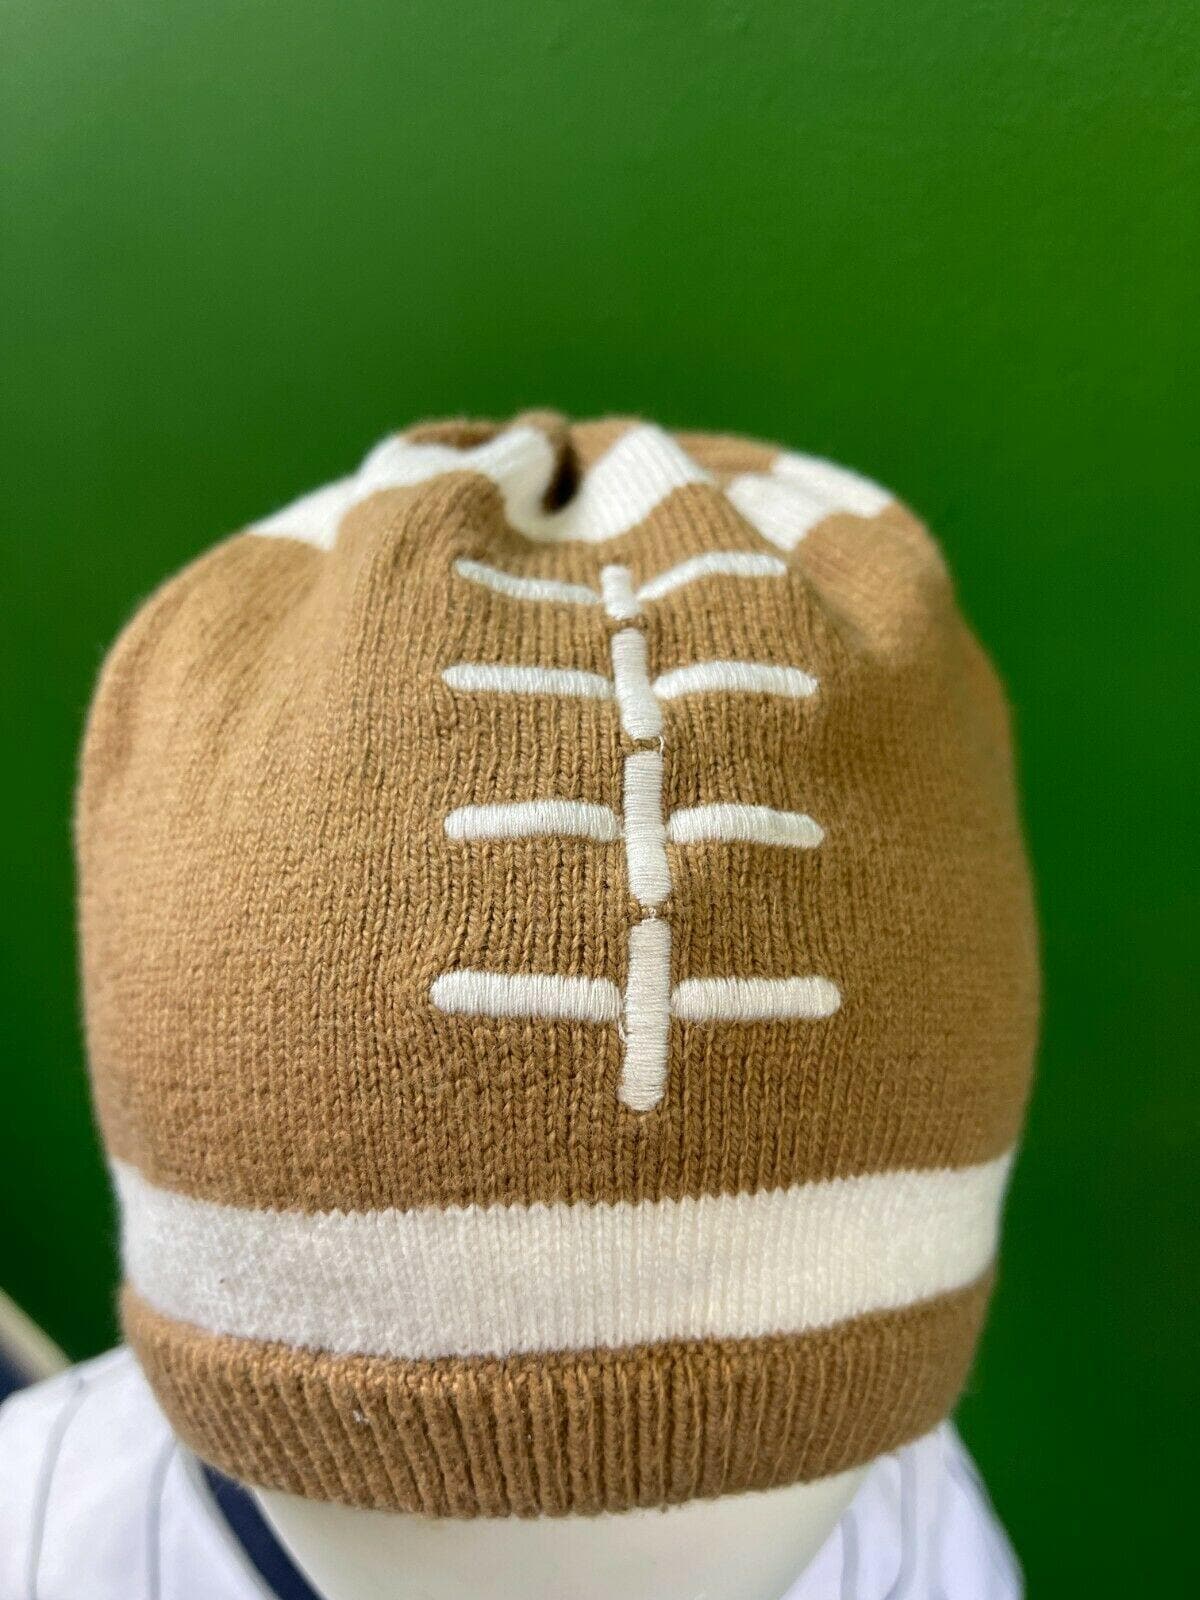 American Football Pigskin Knitted Woolly Hat Beanie Toddler 2T-3T